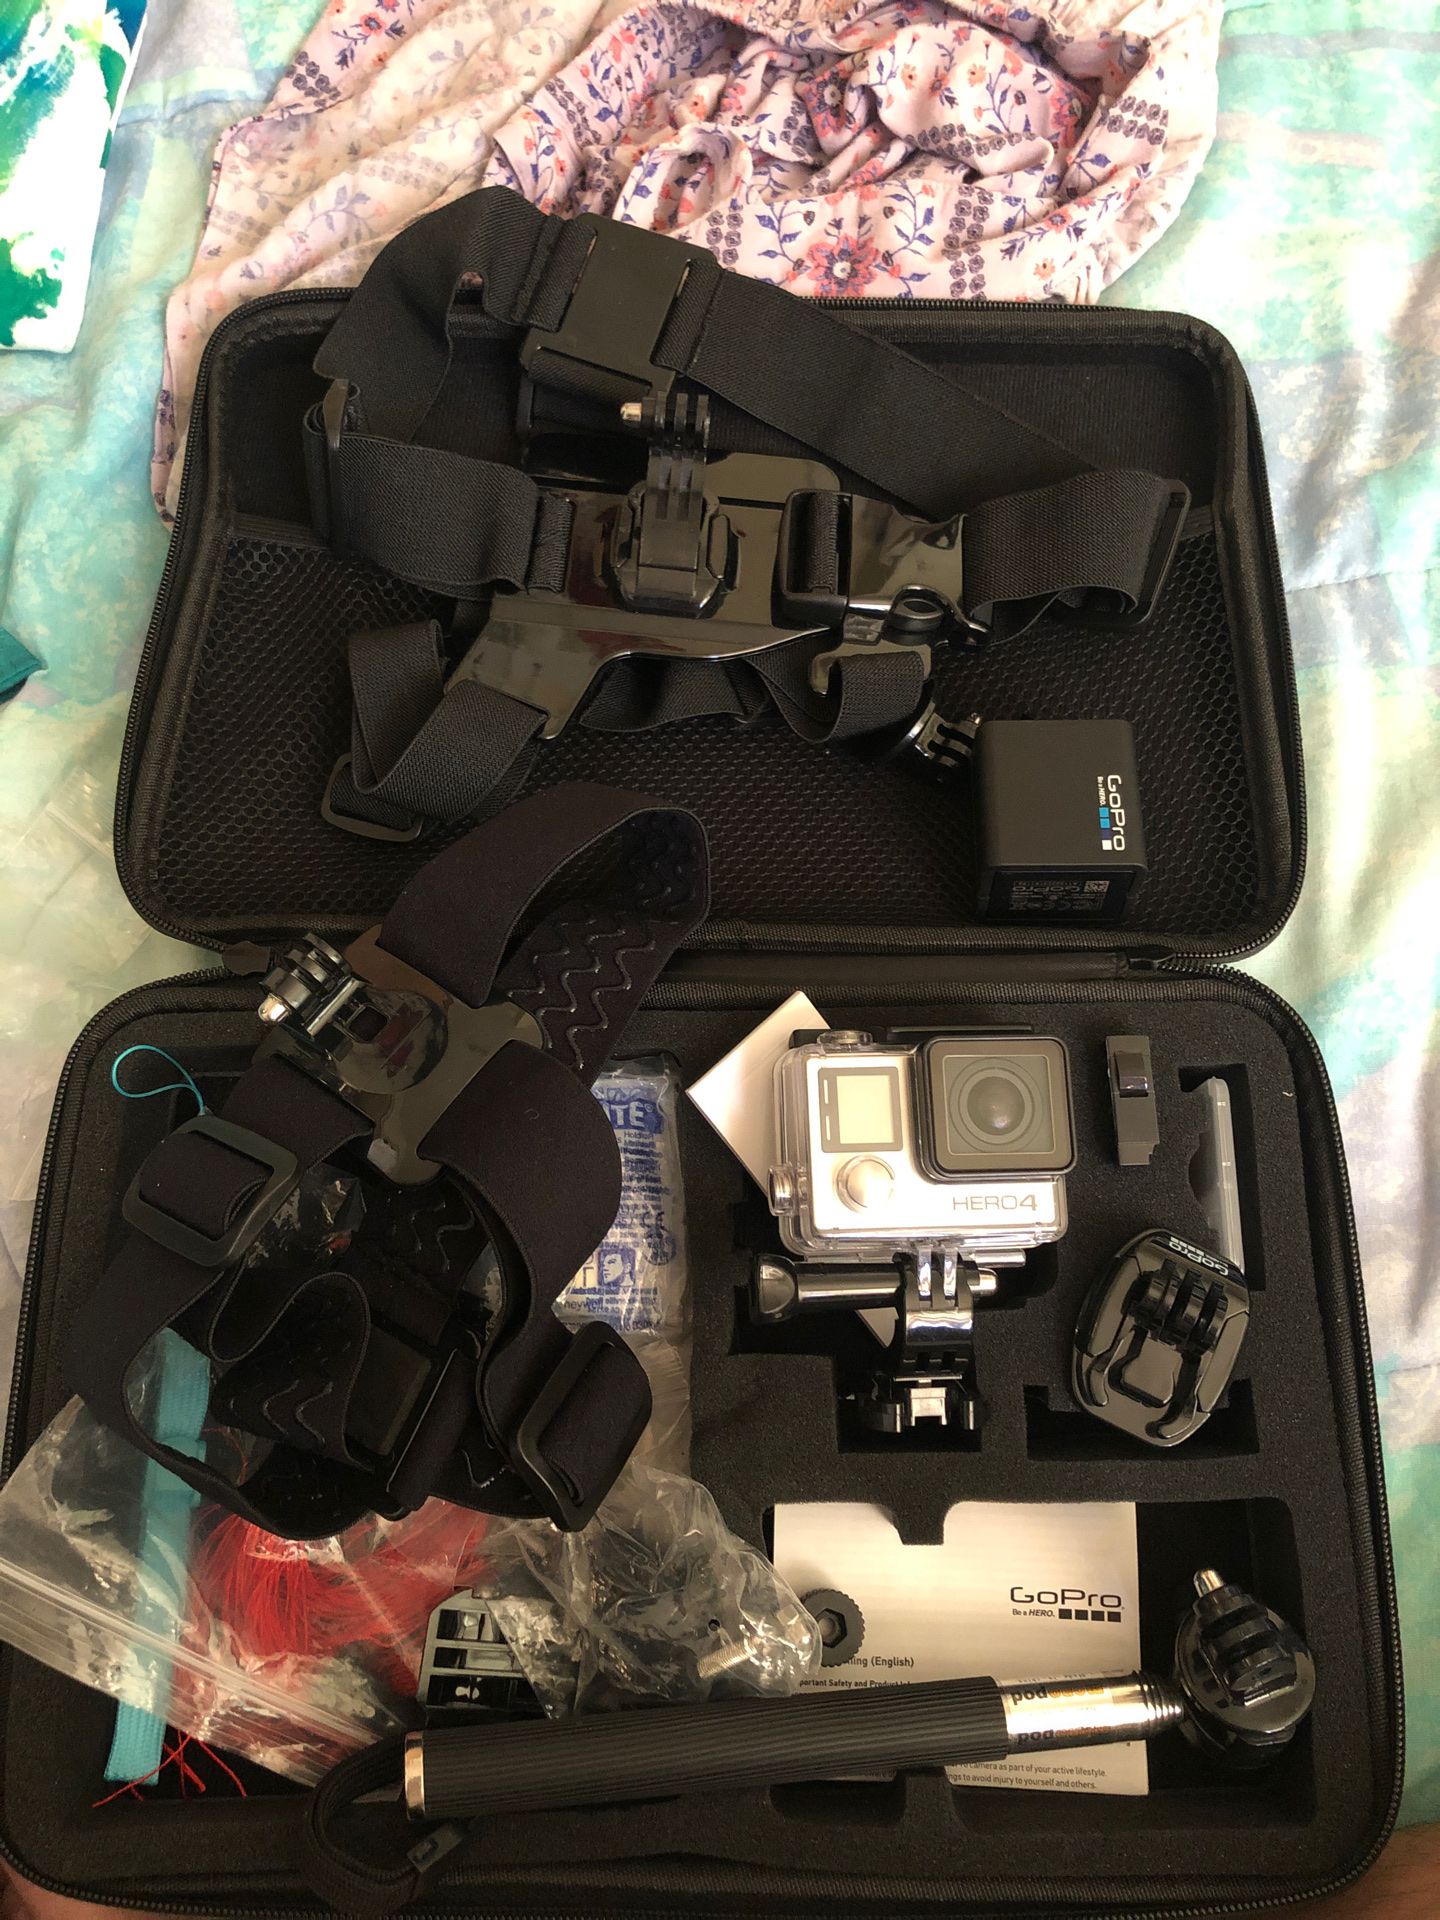 GoPro hero 4 with some accessories